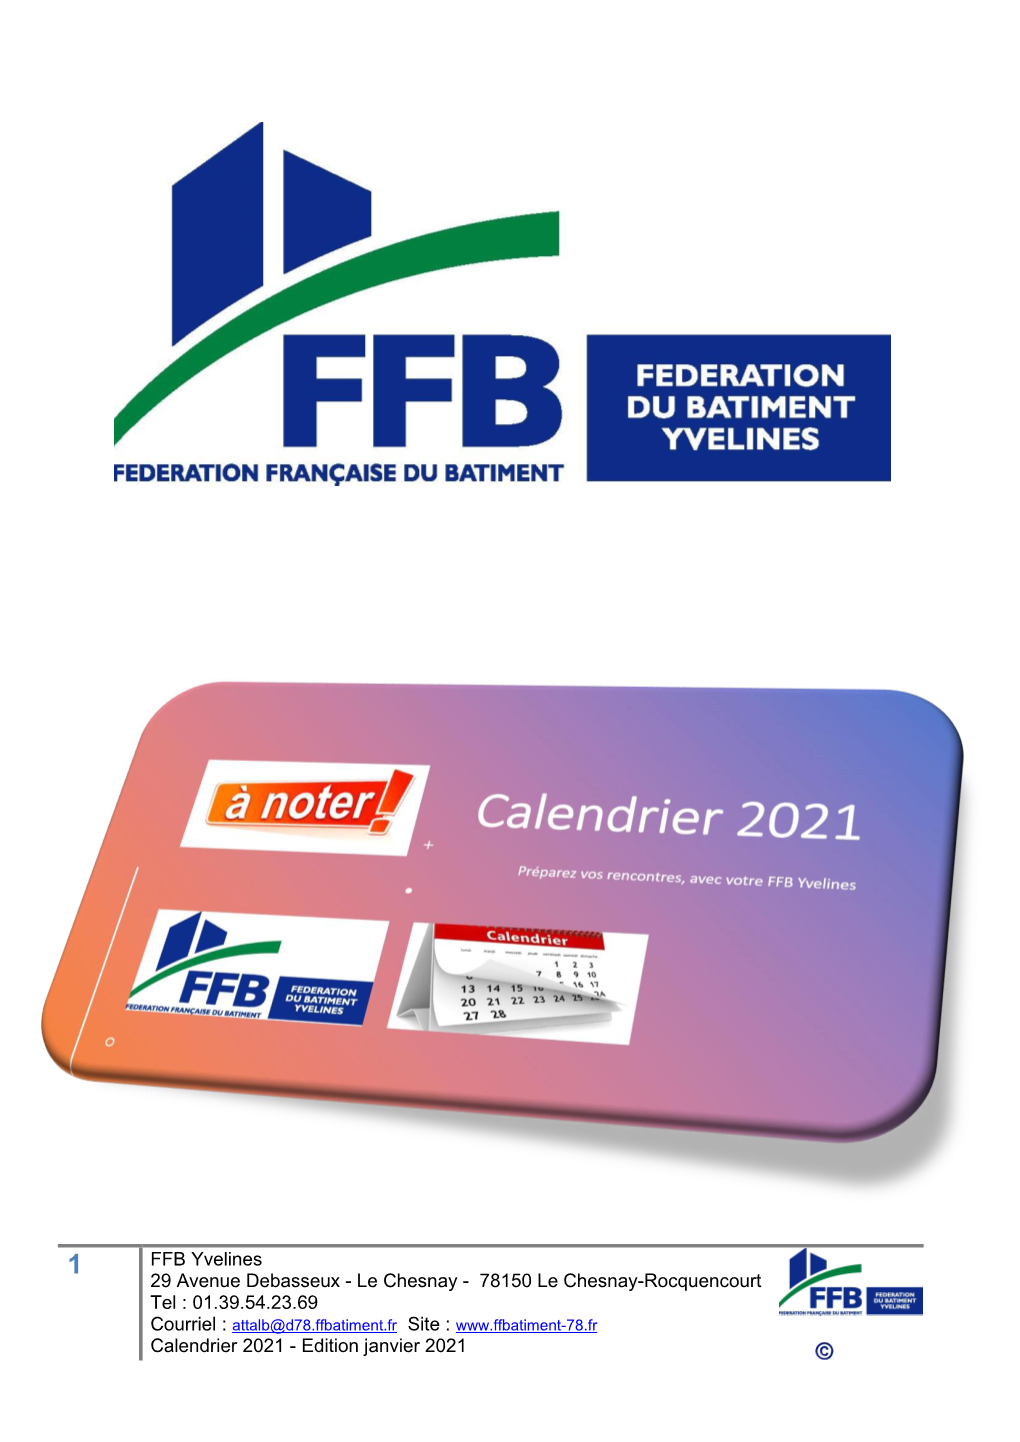 FFB Yvelines 29 Avenue Debasseux - Le Chesnay - 78150 Le Chesnay-Rocquencourt